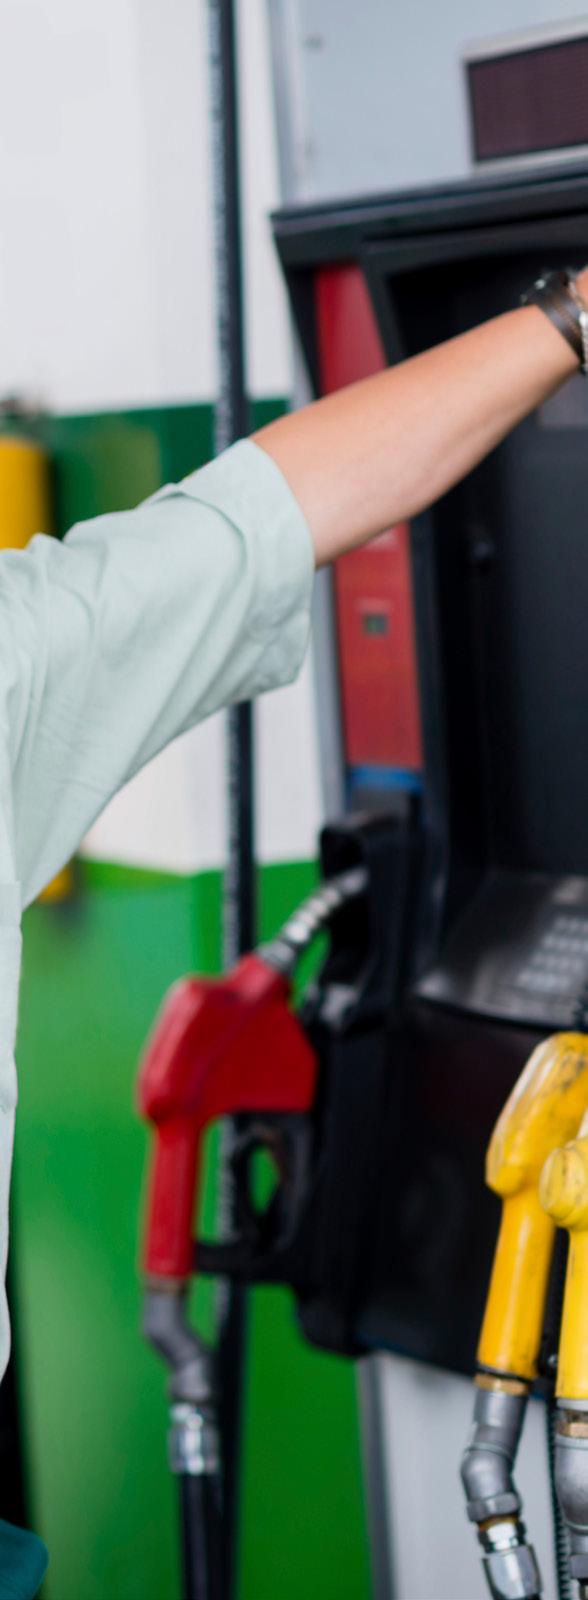 SIX Payment Services The right choice for payments in the shop and on the forecourt With SIX Payment Services, you can rely on a partner with decades of experience in the petroleum industry and